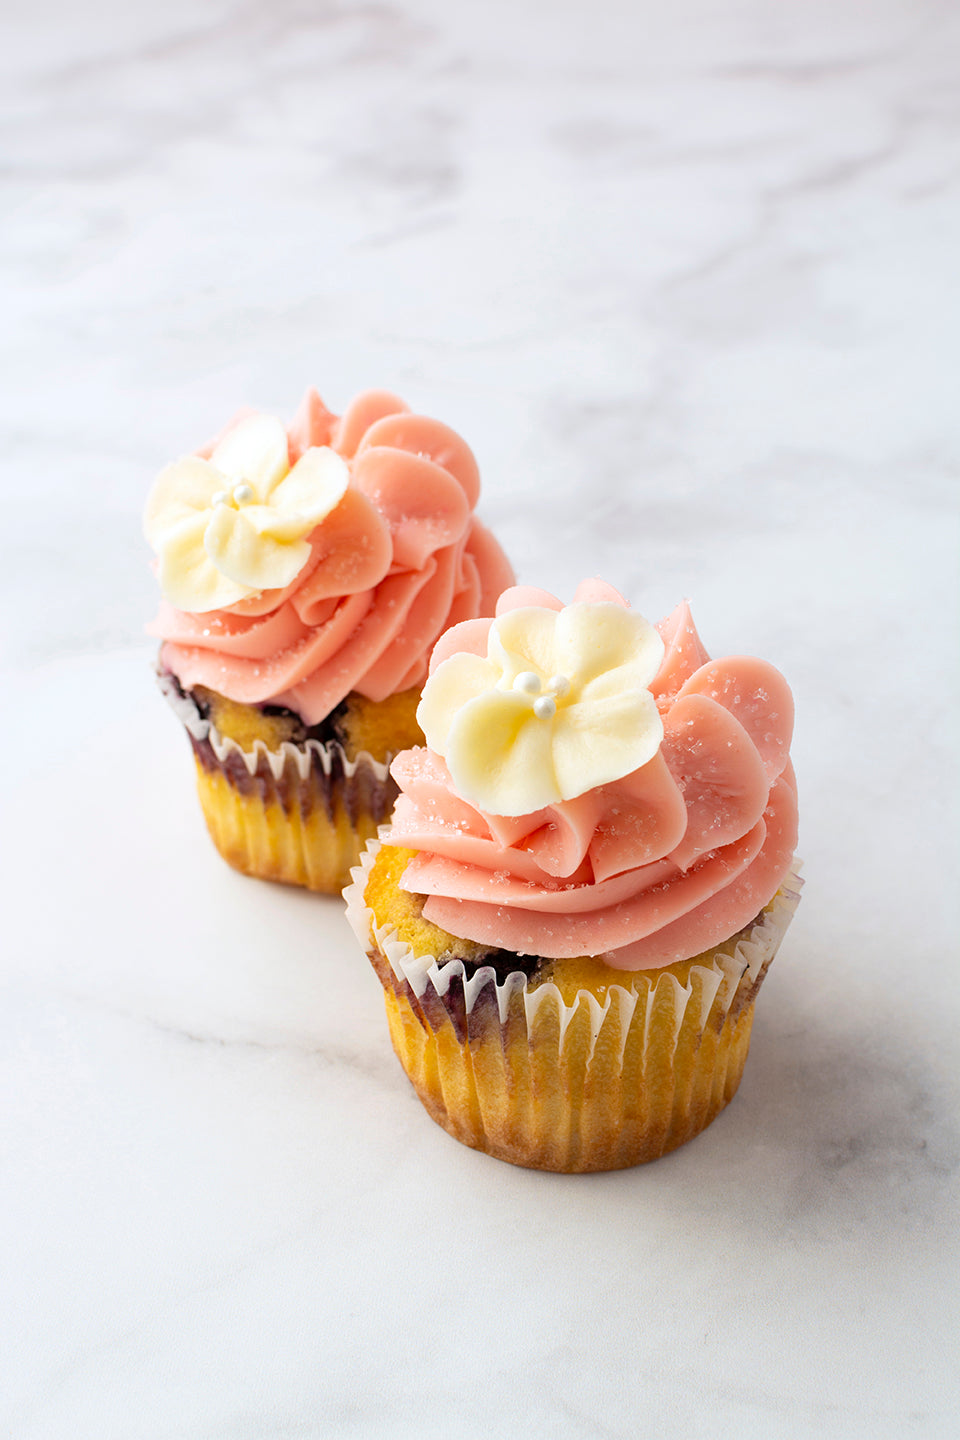 Spoil your mom with some gourmet cupcakes!